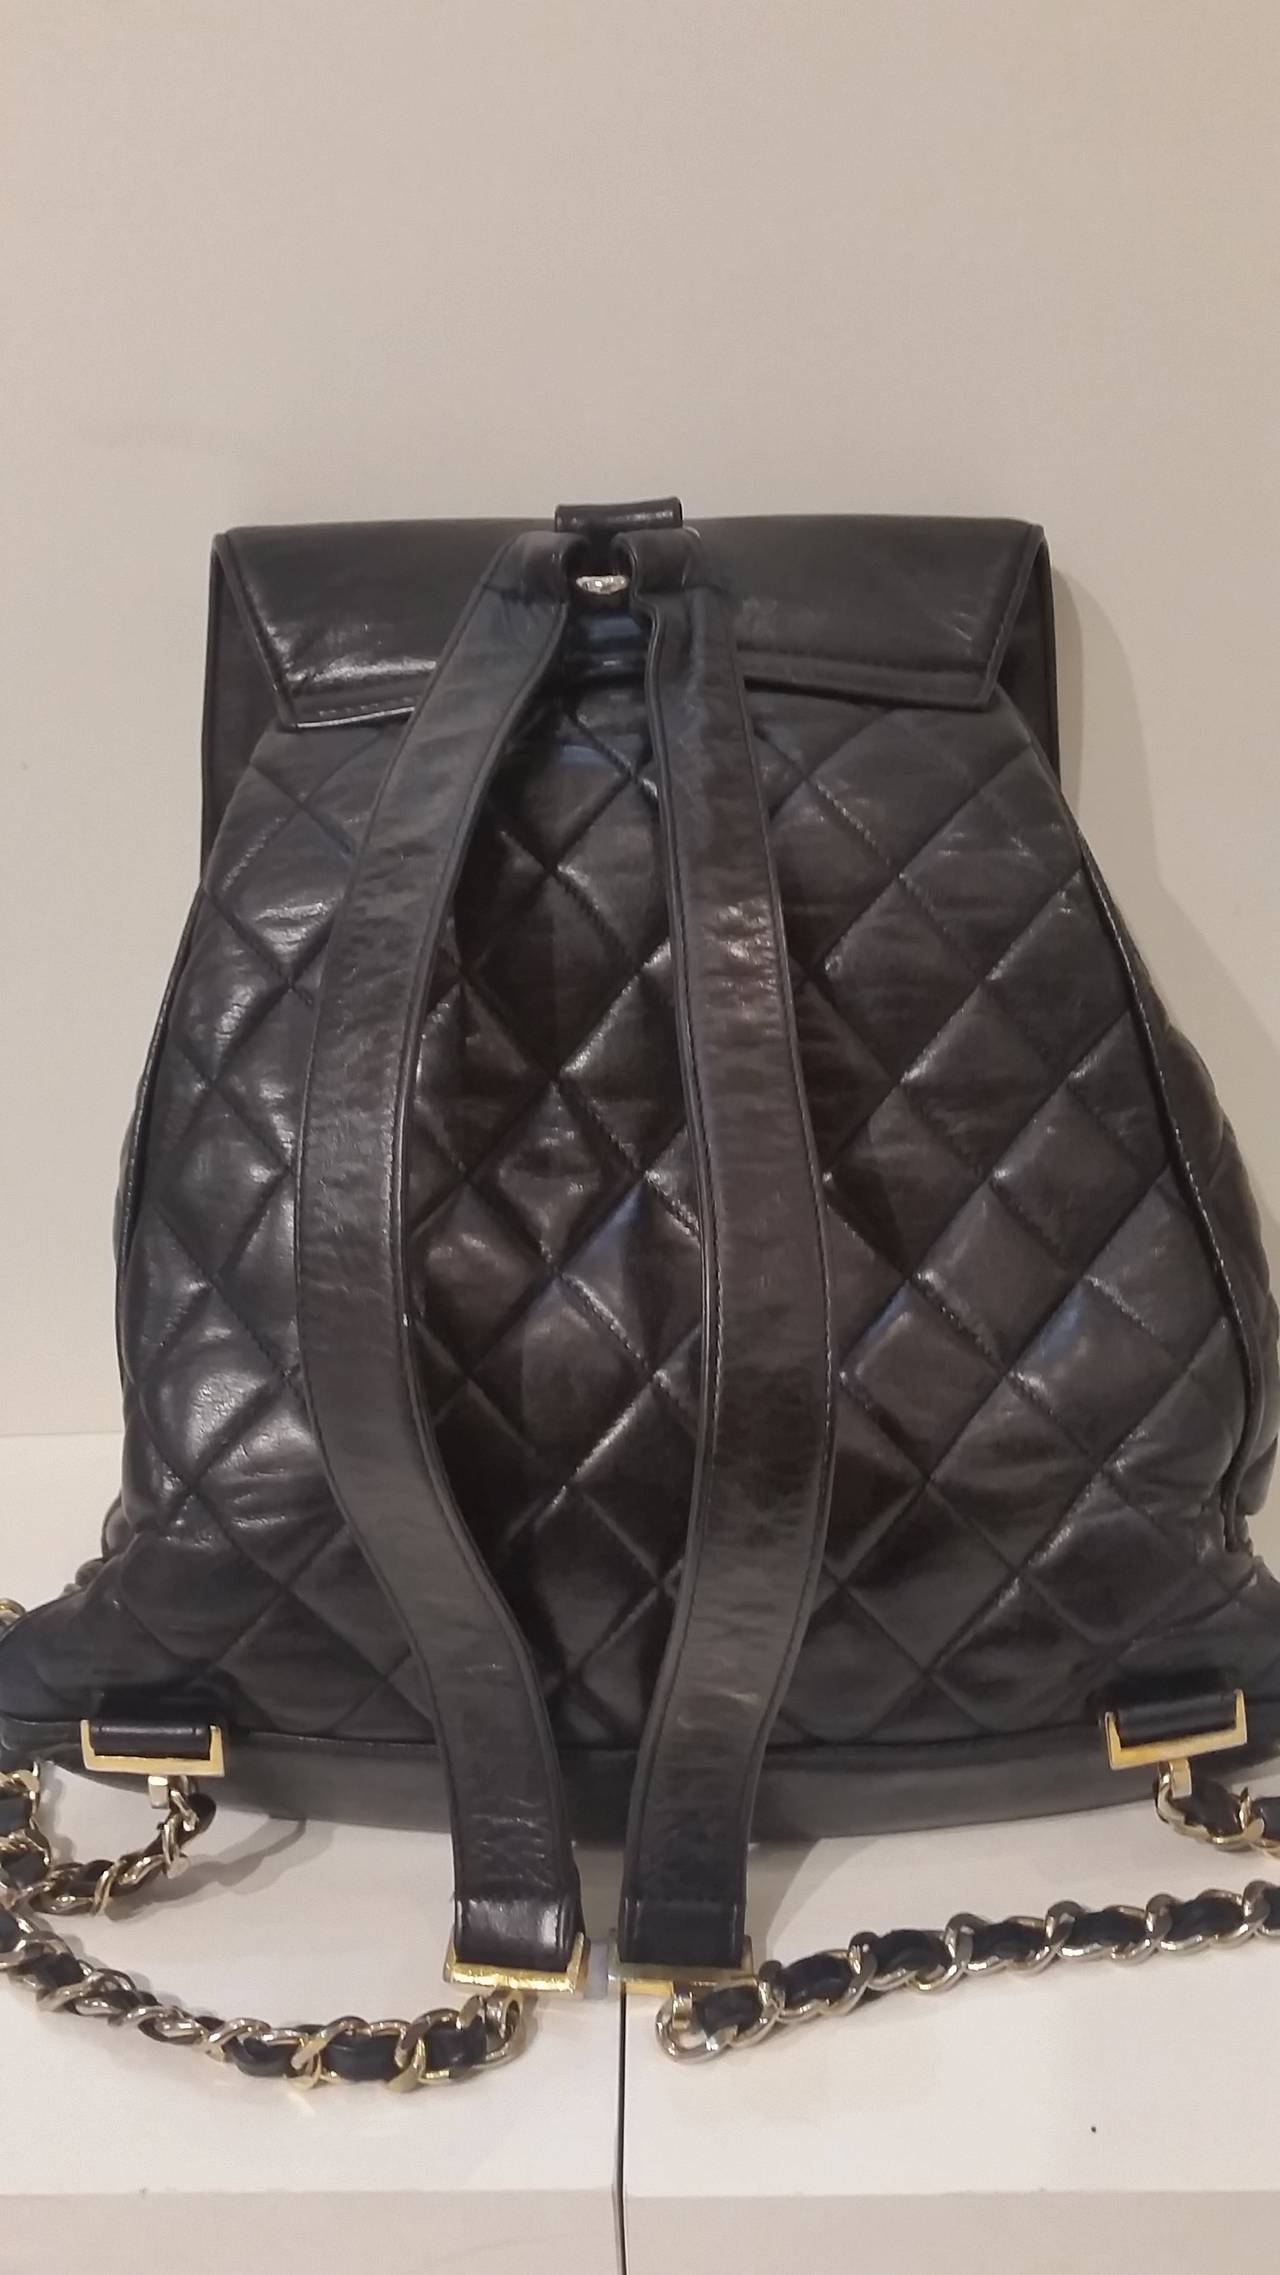 1980s Chanel black leather backpack
Black quilted leather backpack from Chanel Vintage featuring two thin shoulder straps, a fold-over frap with a gold-tone double 'C' logo plaque, a drawstring top and an interior zip pocket. Please note that